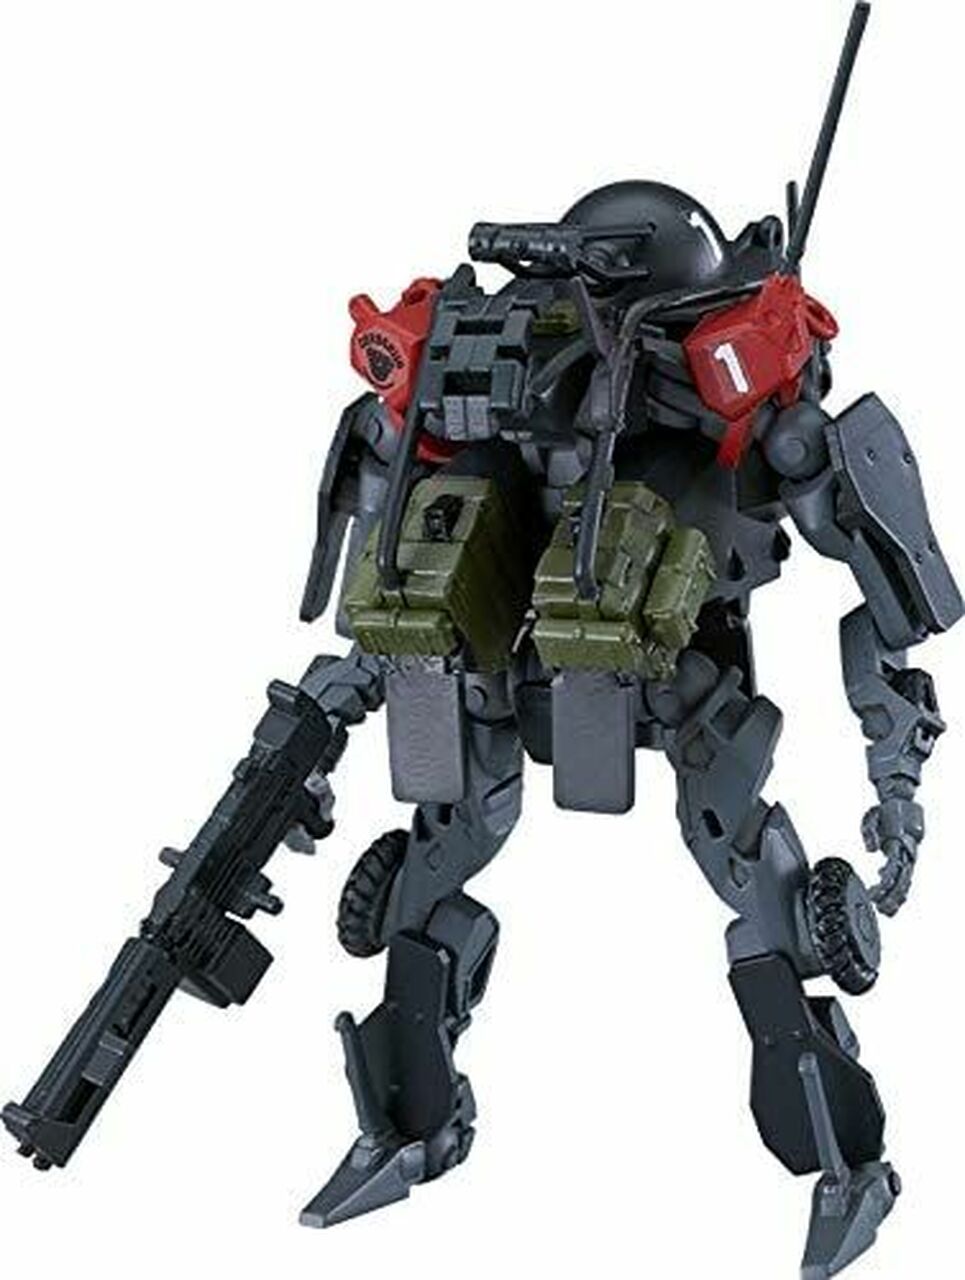 Good Smile Company: Obsolete Series PMC Cerberus Security Services Exoframe 1/35 Scale Moderoid Model Kit 